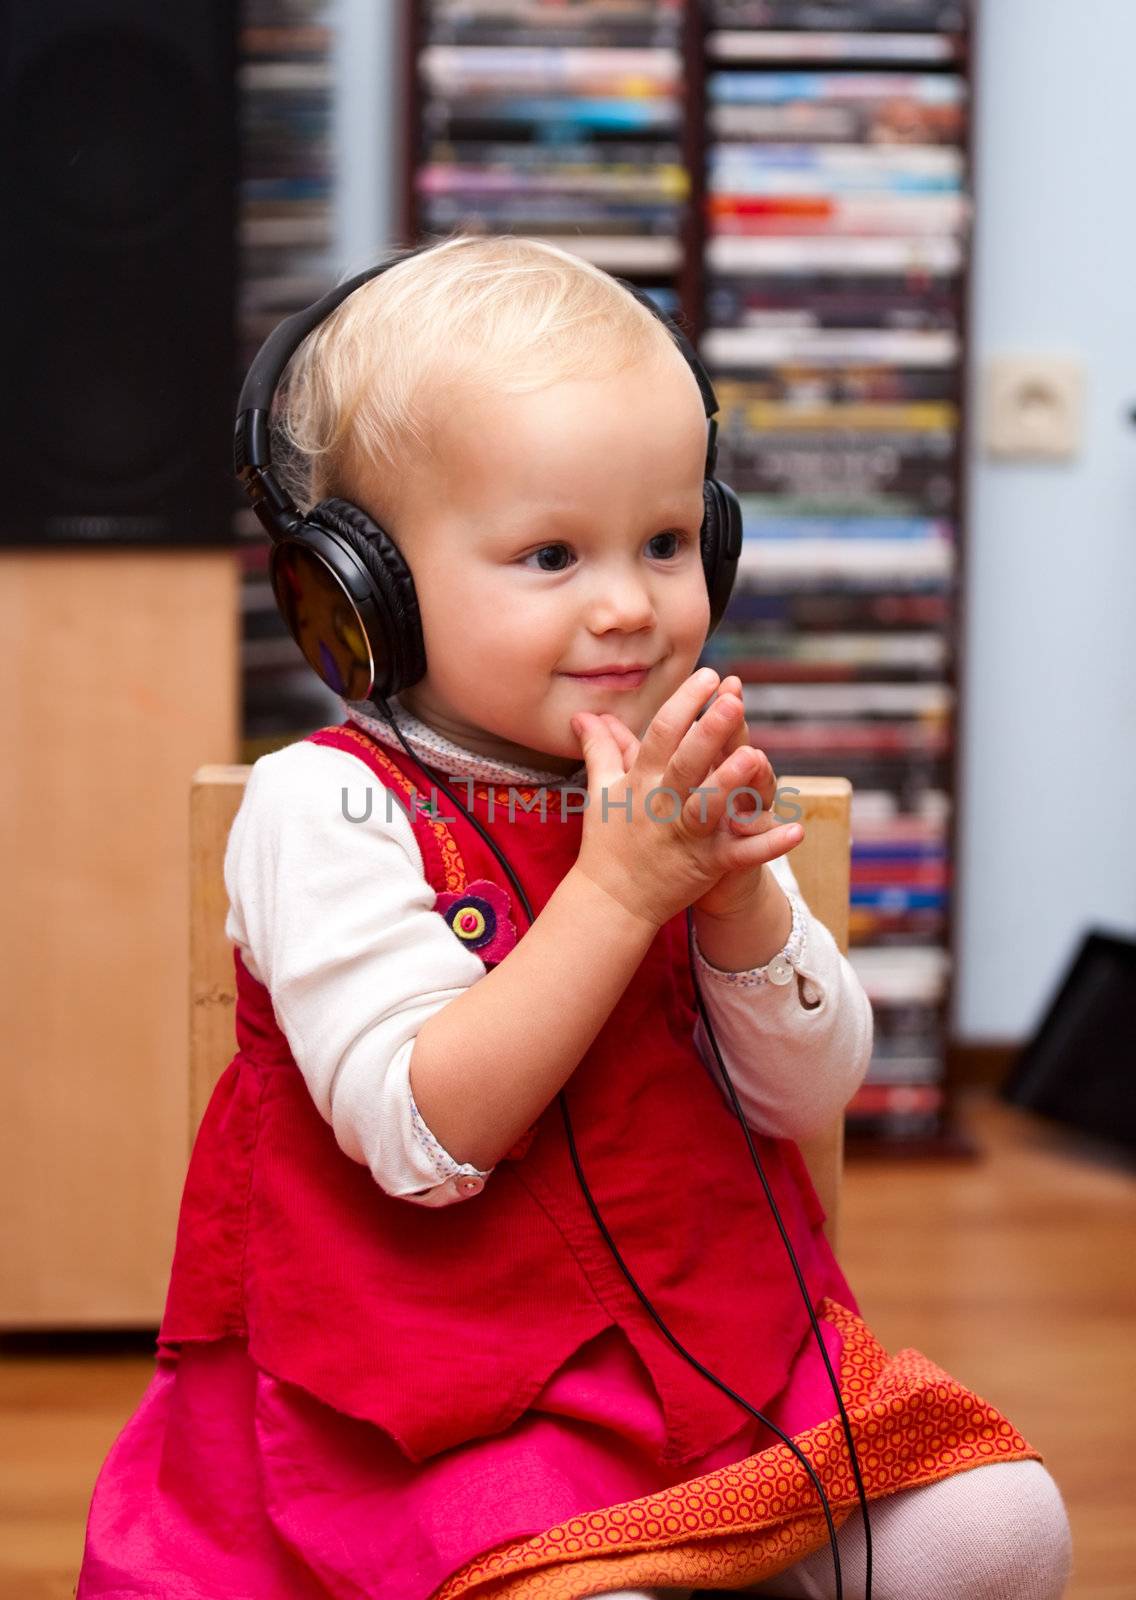 Cute baby girl listening to a music